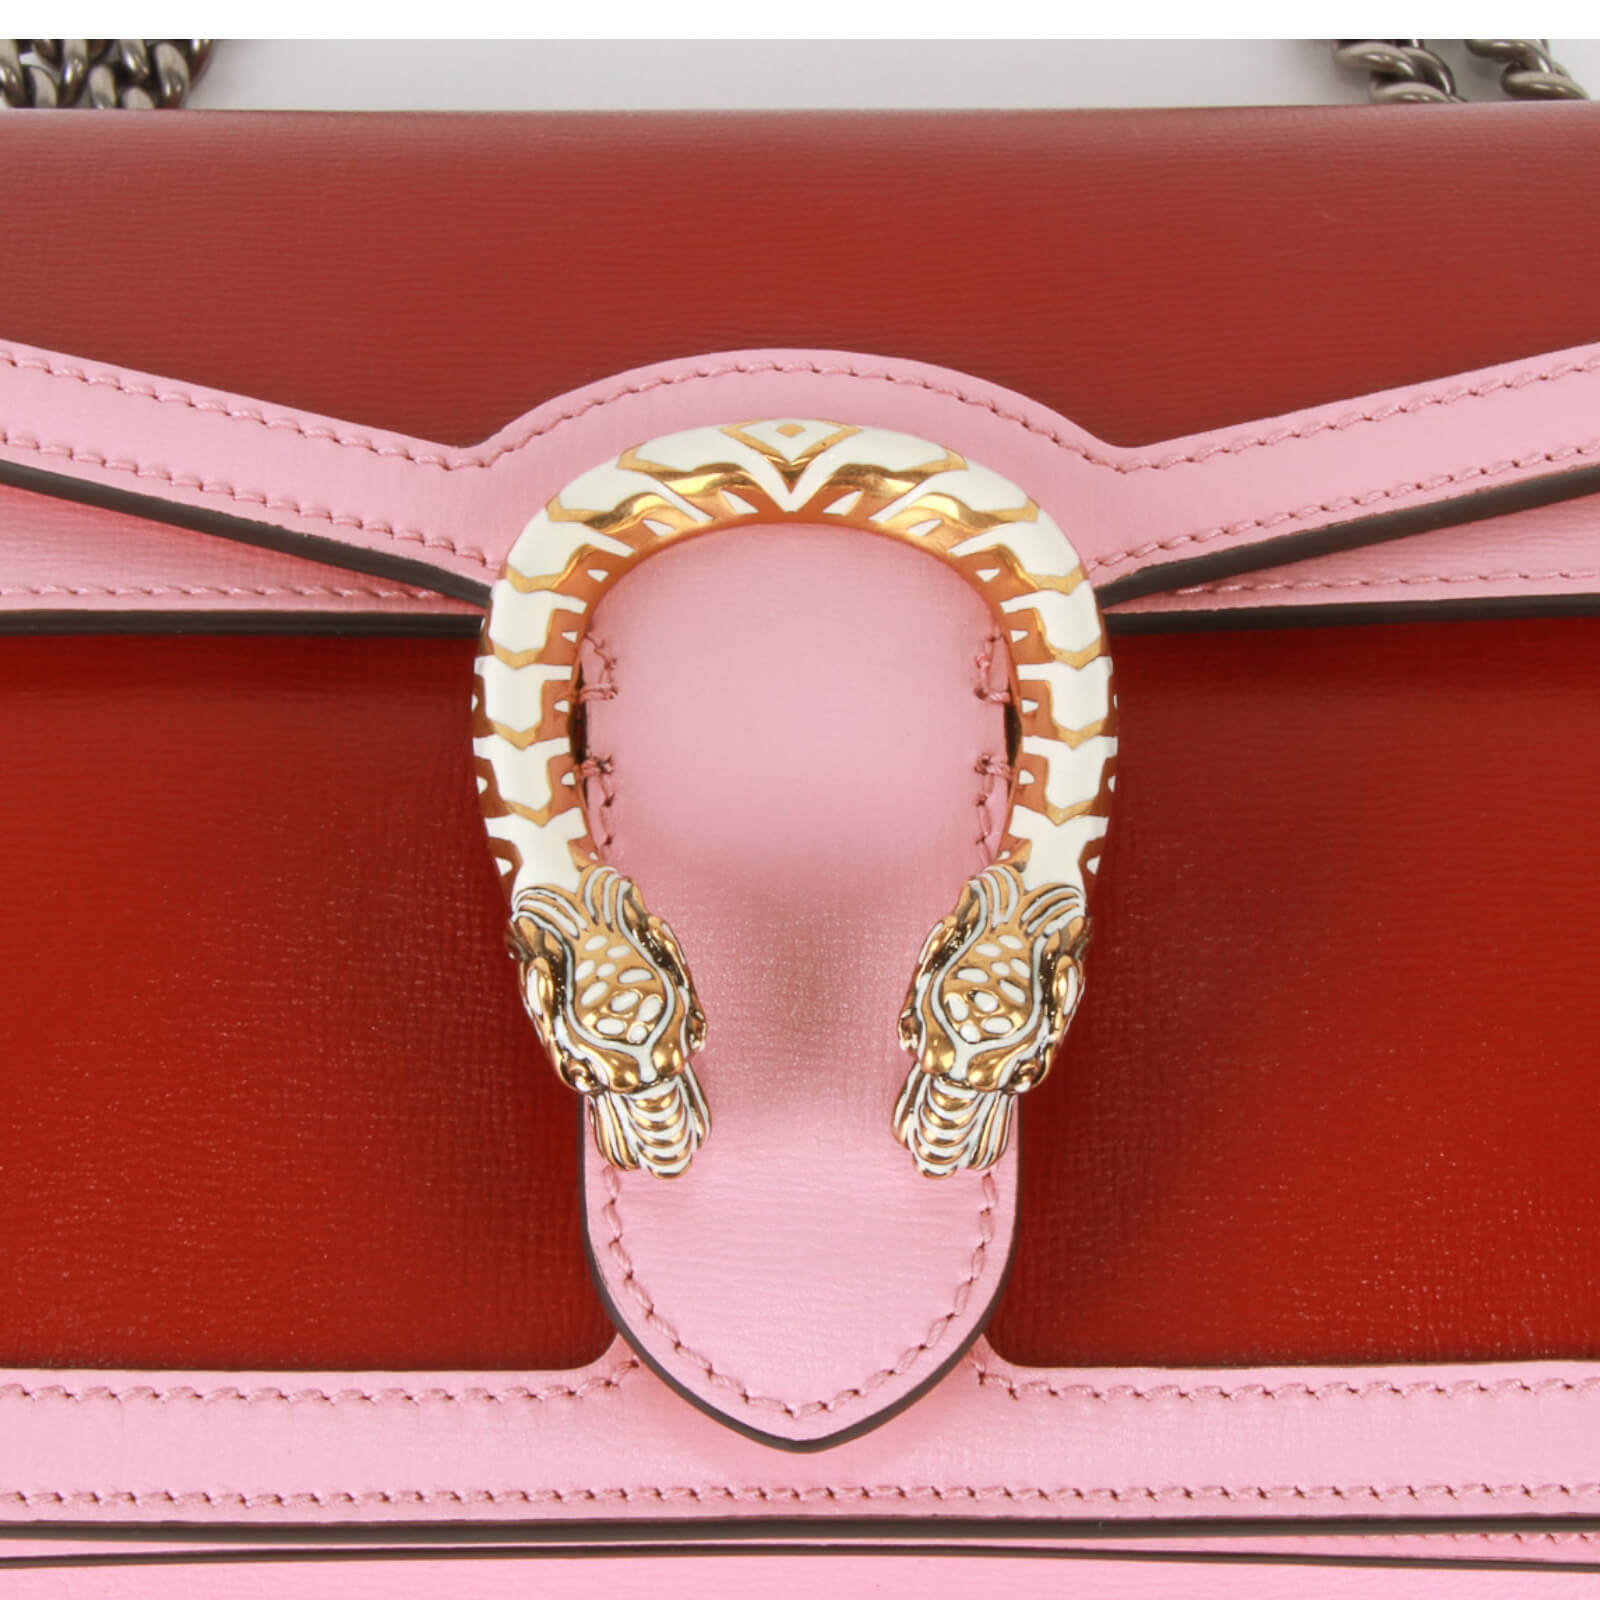 GUCCI Dionysus Small Shoulder Bag in Red and Pink